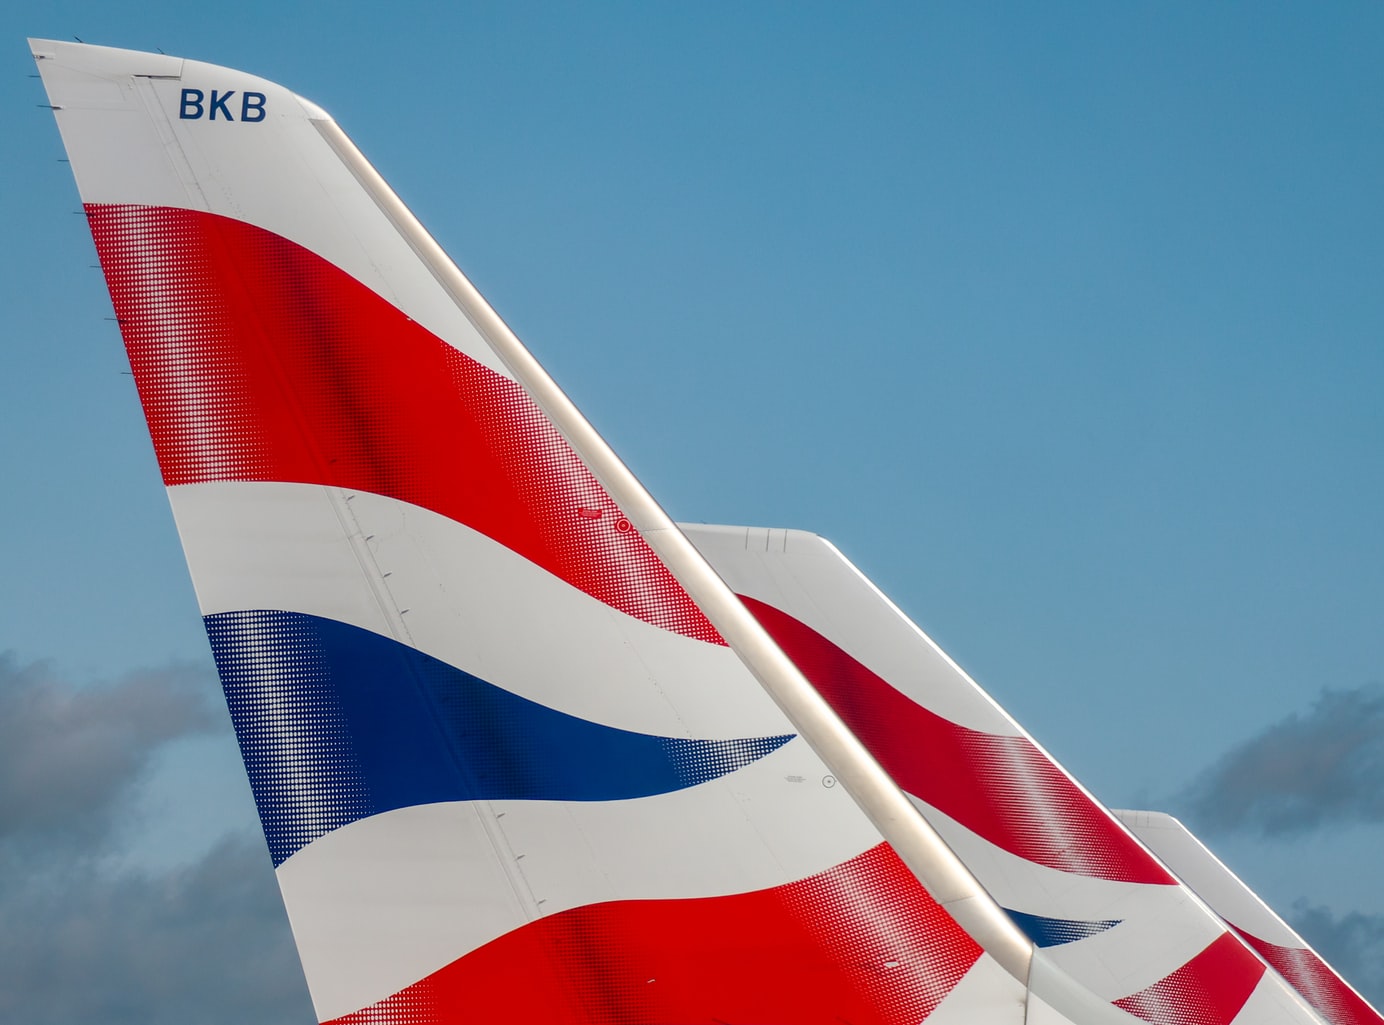 British Airways tails and sign